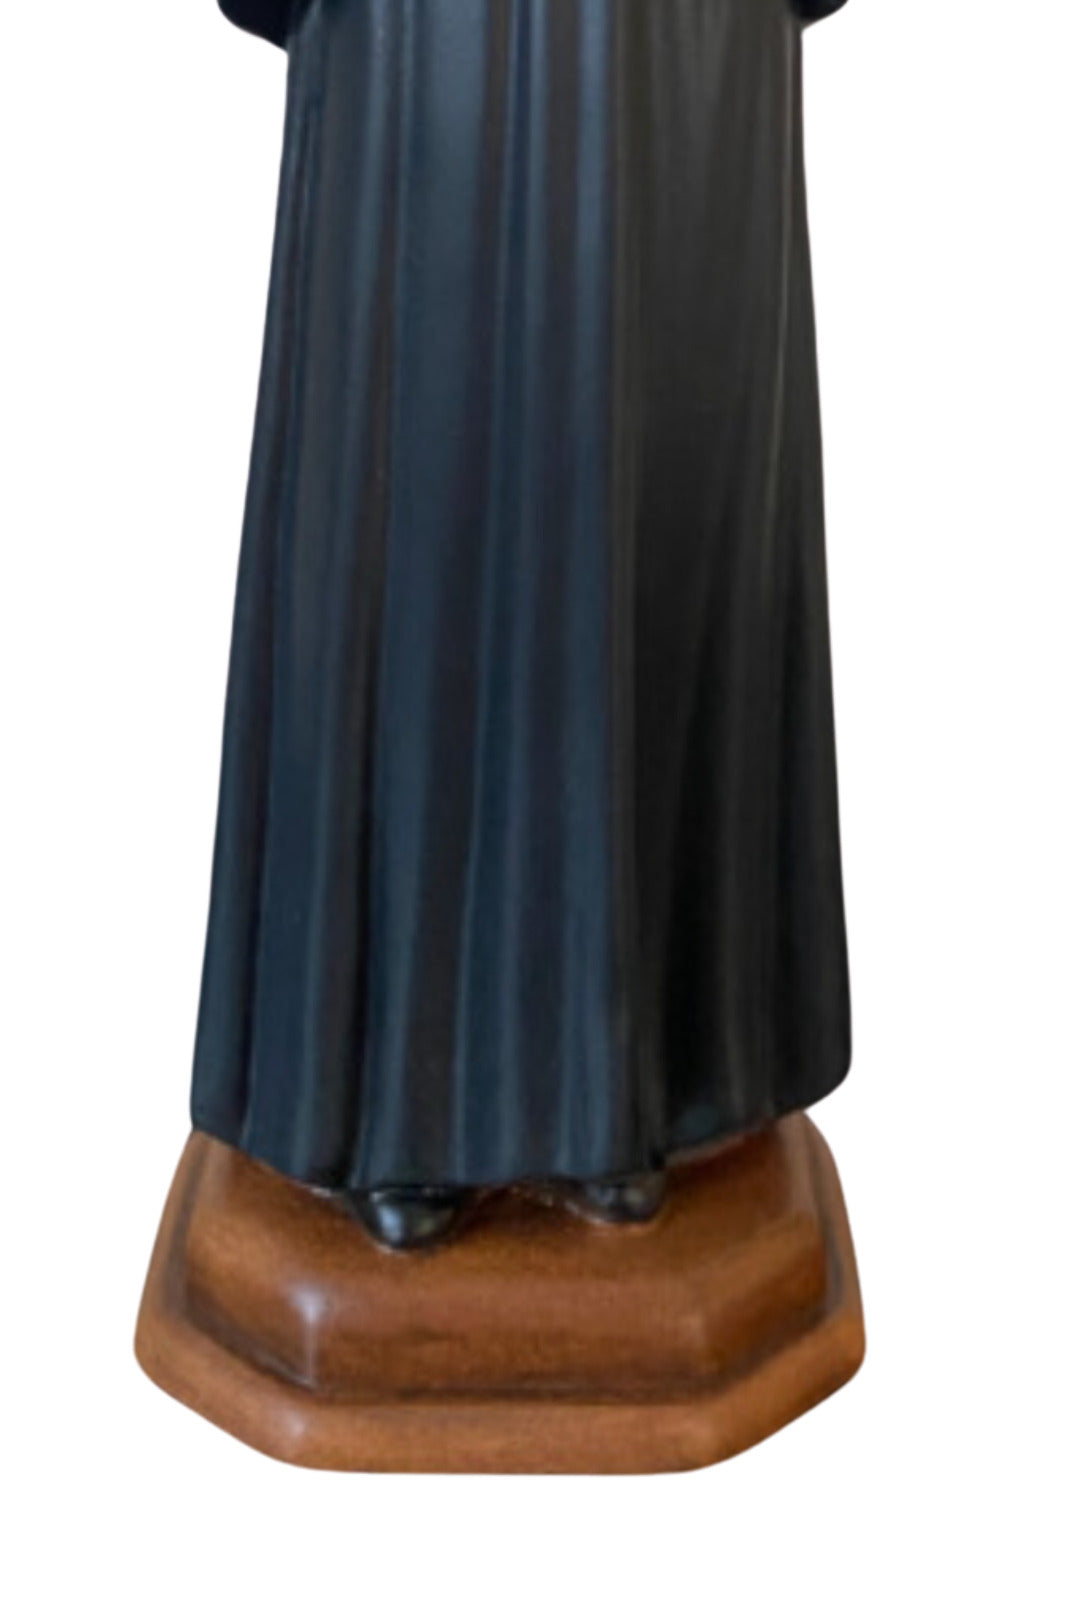 11 inch Saint Gemma Galgani Statue hand made in Colombia - Bob and Penny Lord